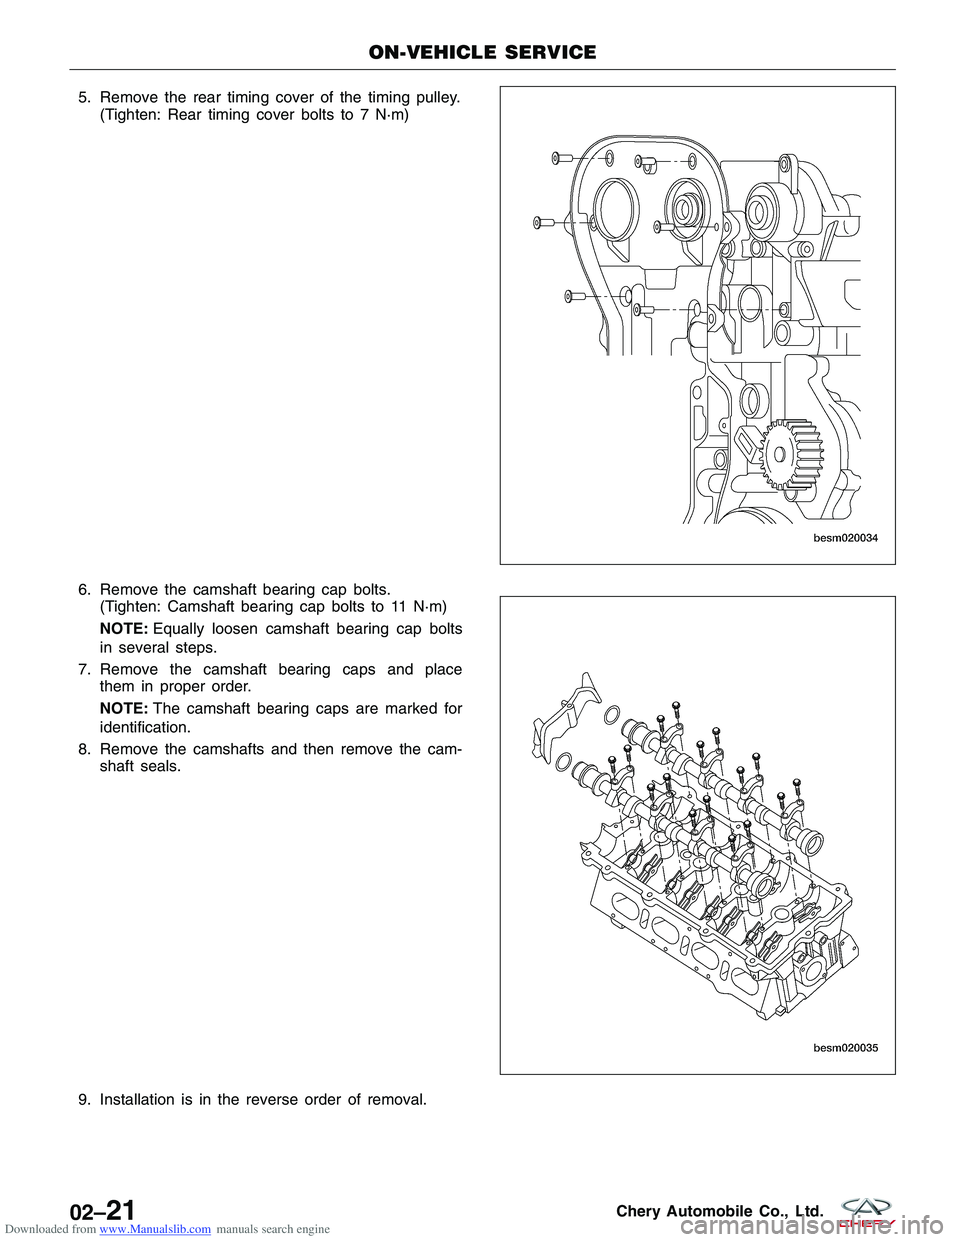 CHERY TIGGO 2009  Service Service Manual Downloaded from www.Manualslib.com manuals search engine 5. Remove the rear timing cover of the timing pulley.(Tighten: Rear timing cover bolts to 7 N·m)
6. Remove the camshaft bearing cap bolts. (Ti